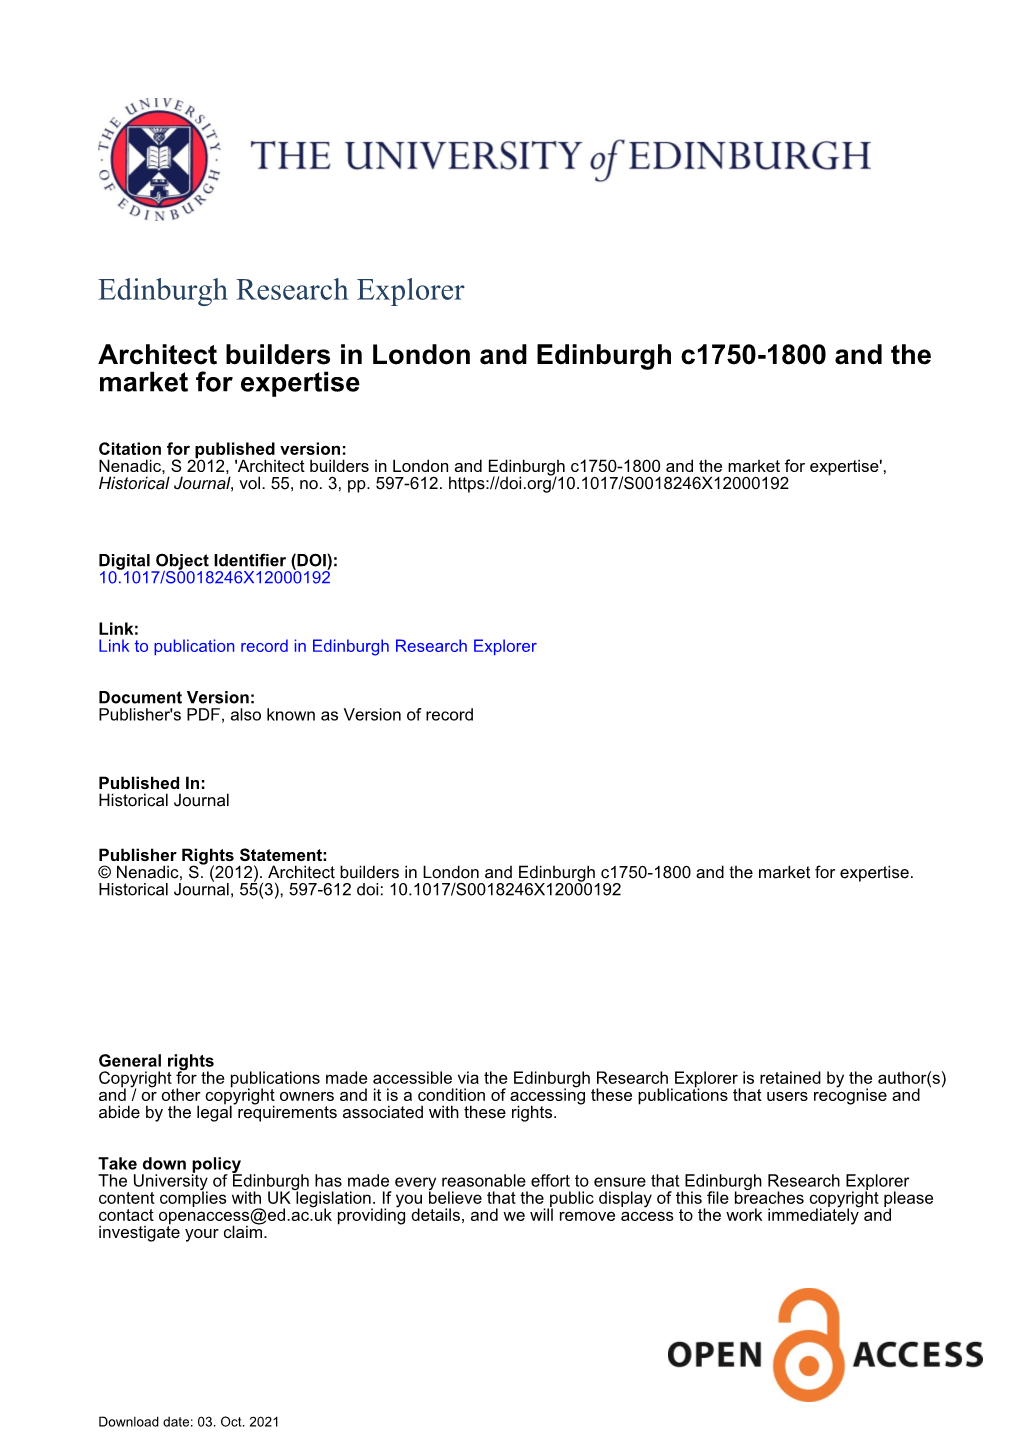 Architect Builders in London and Edinburgh C1750-1800 and the Market for Expertise